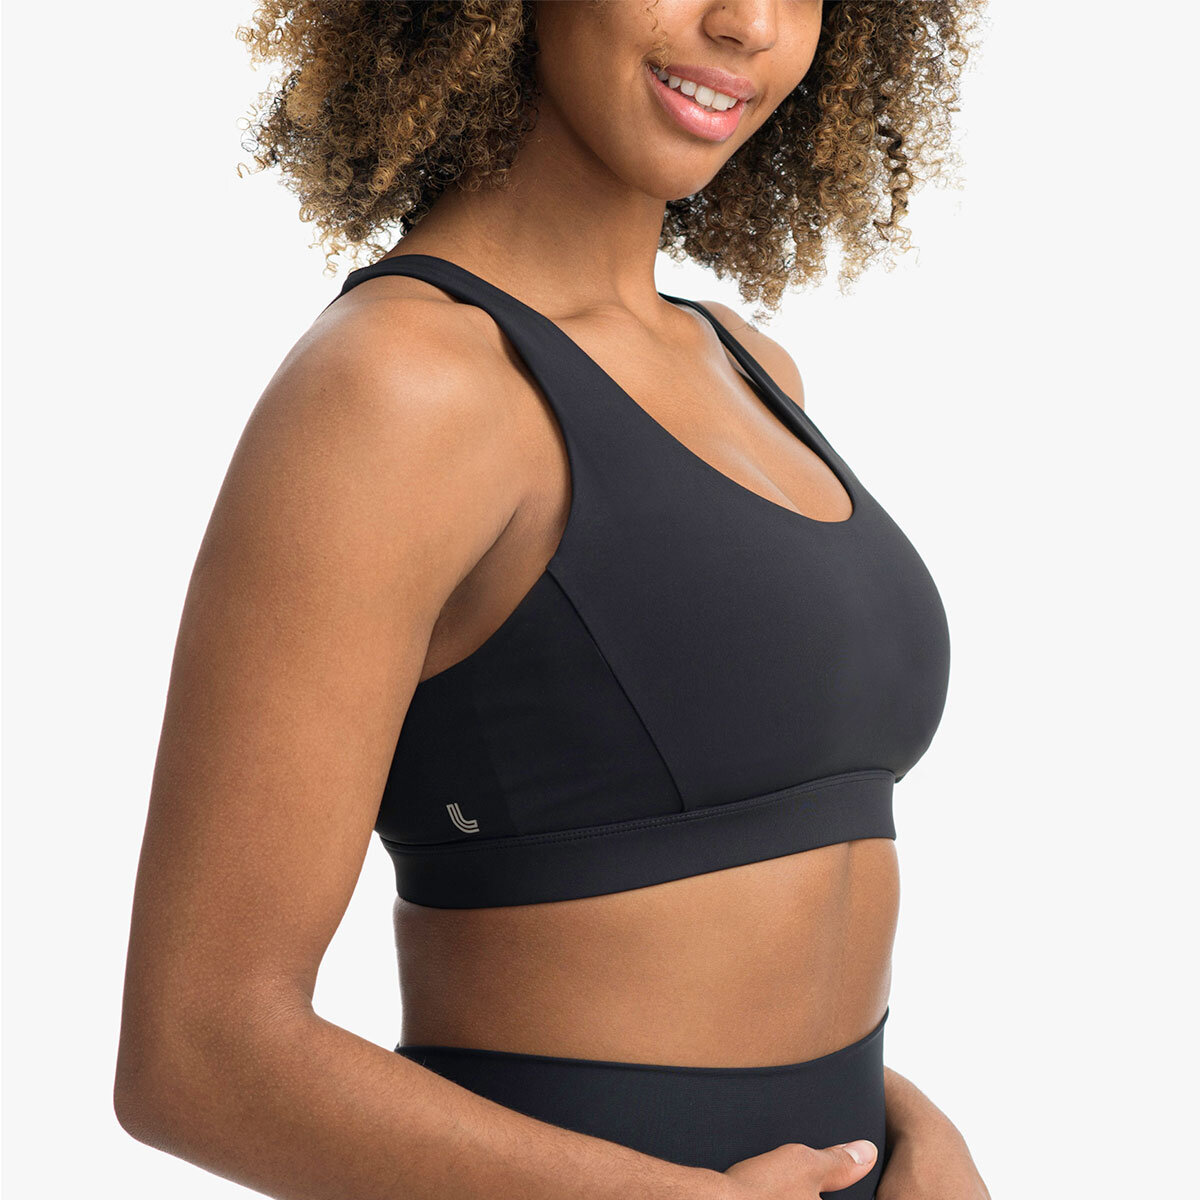 Image of front of sports bra